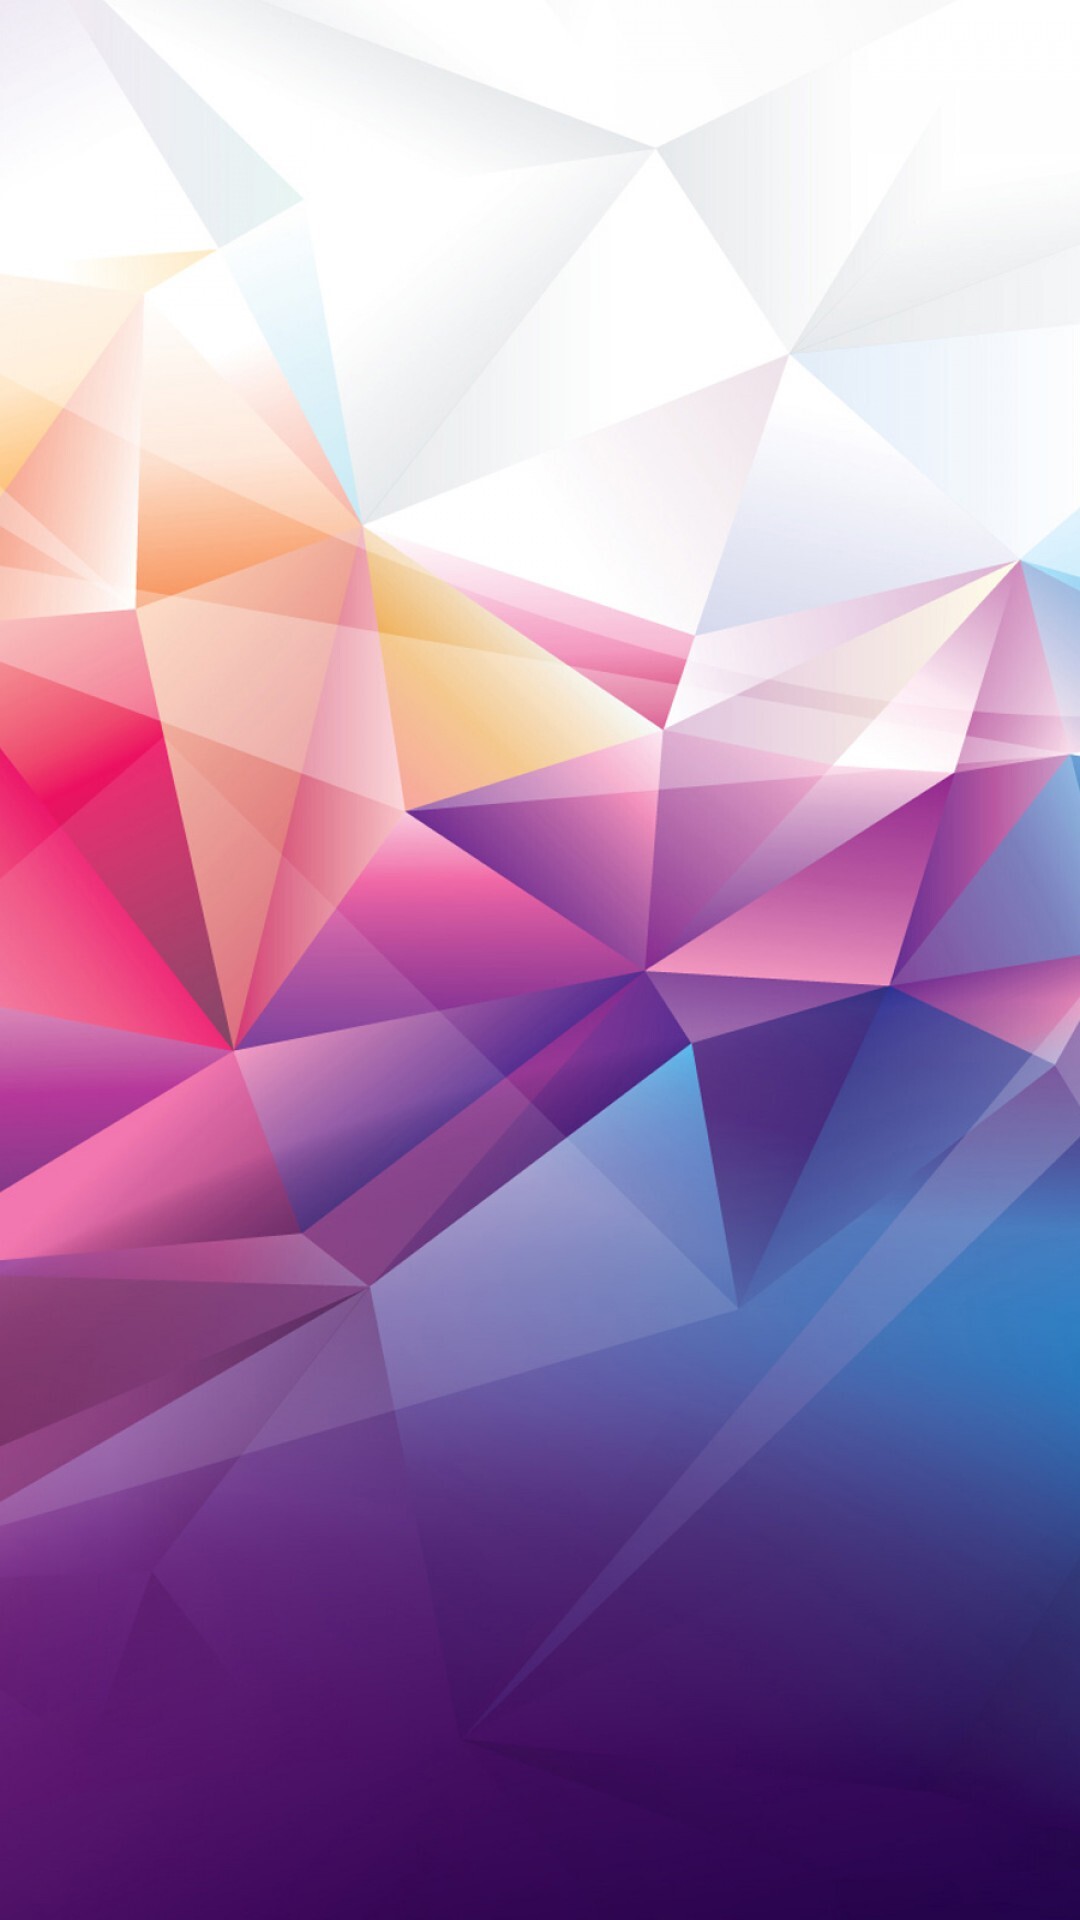 Triangle: Polygons, Orange, Red, Blue, Abstract pattern. 1080x1920 Full HD Background.